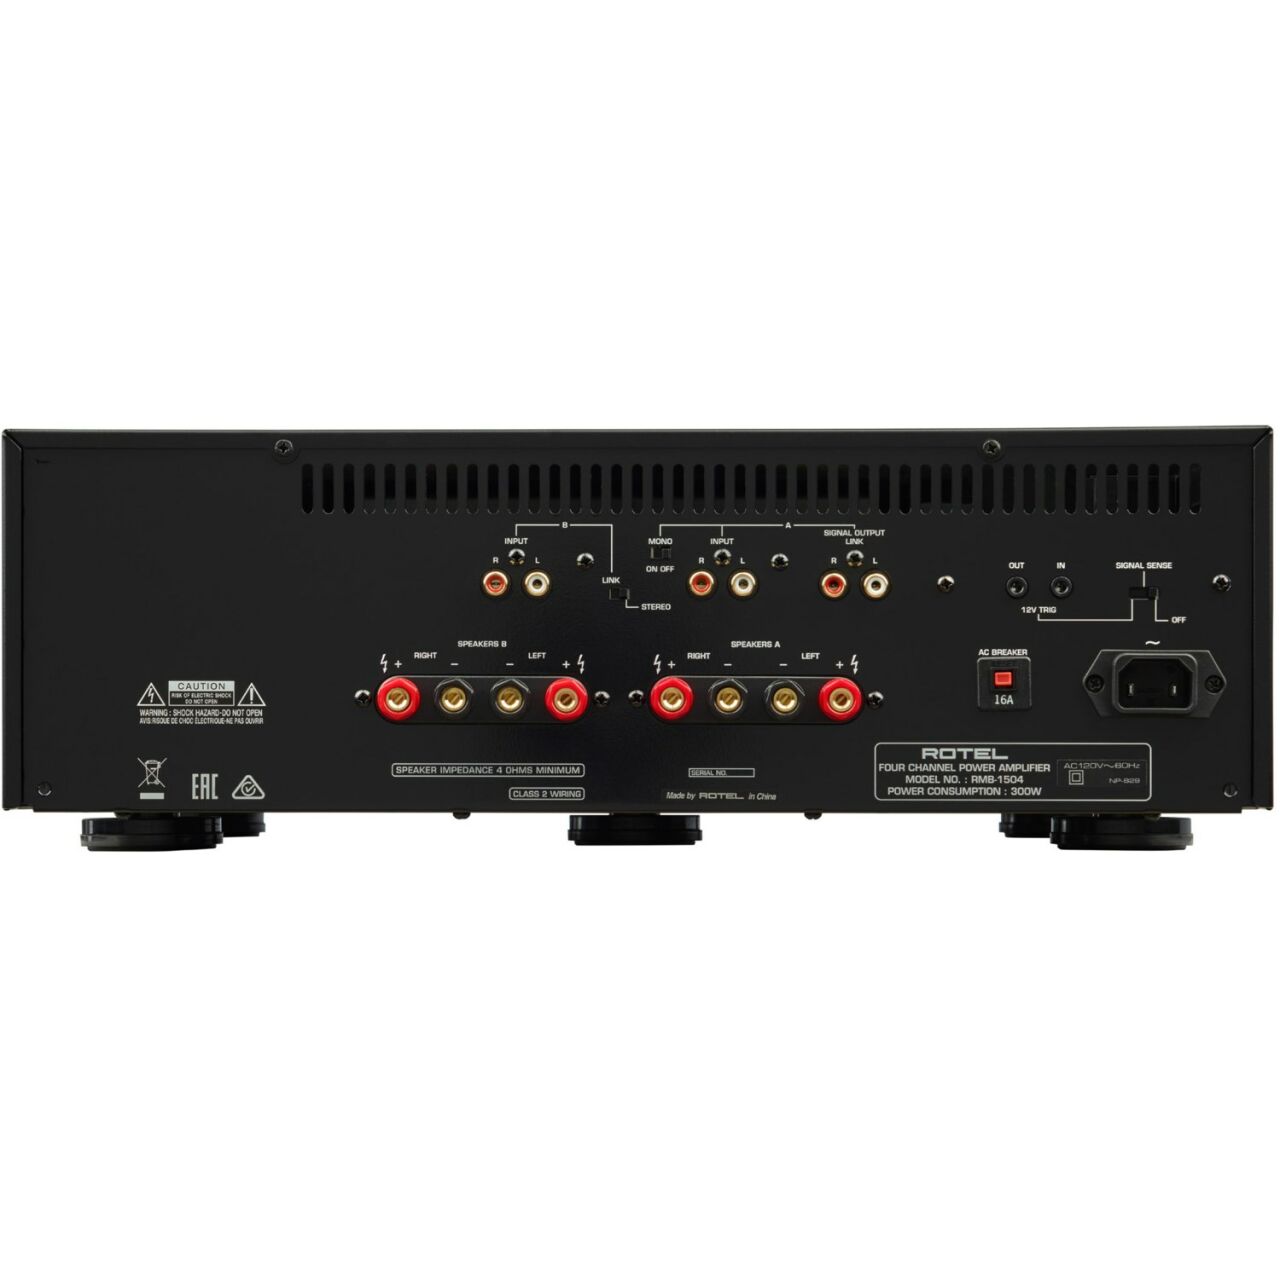 Rotel RMB-1504 Four Channel Amp